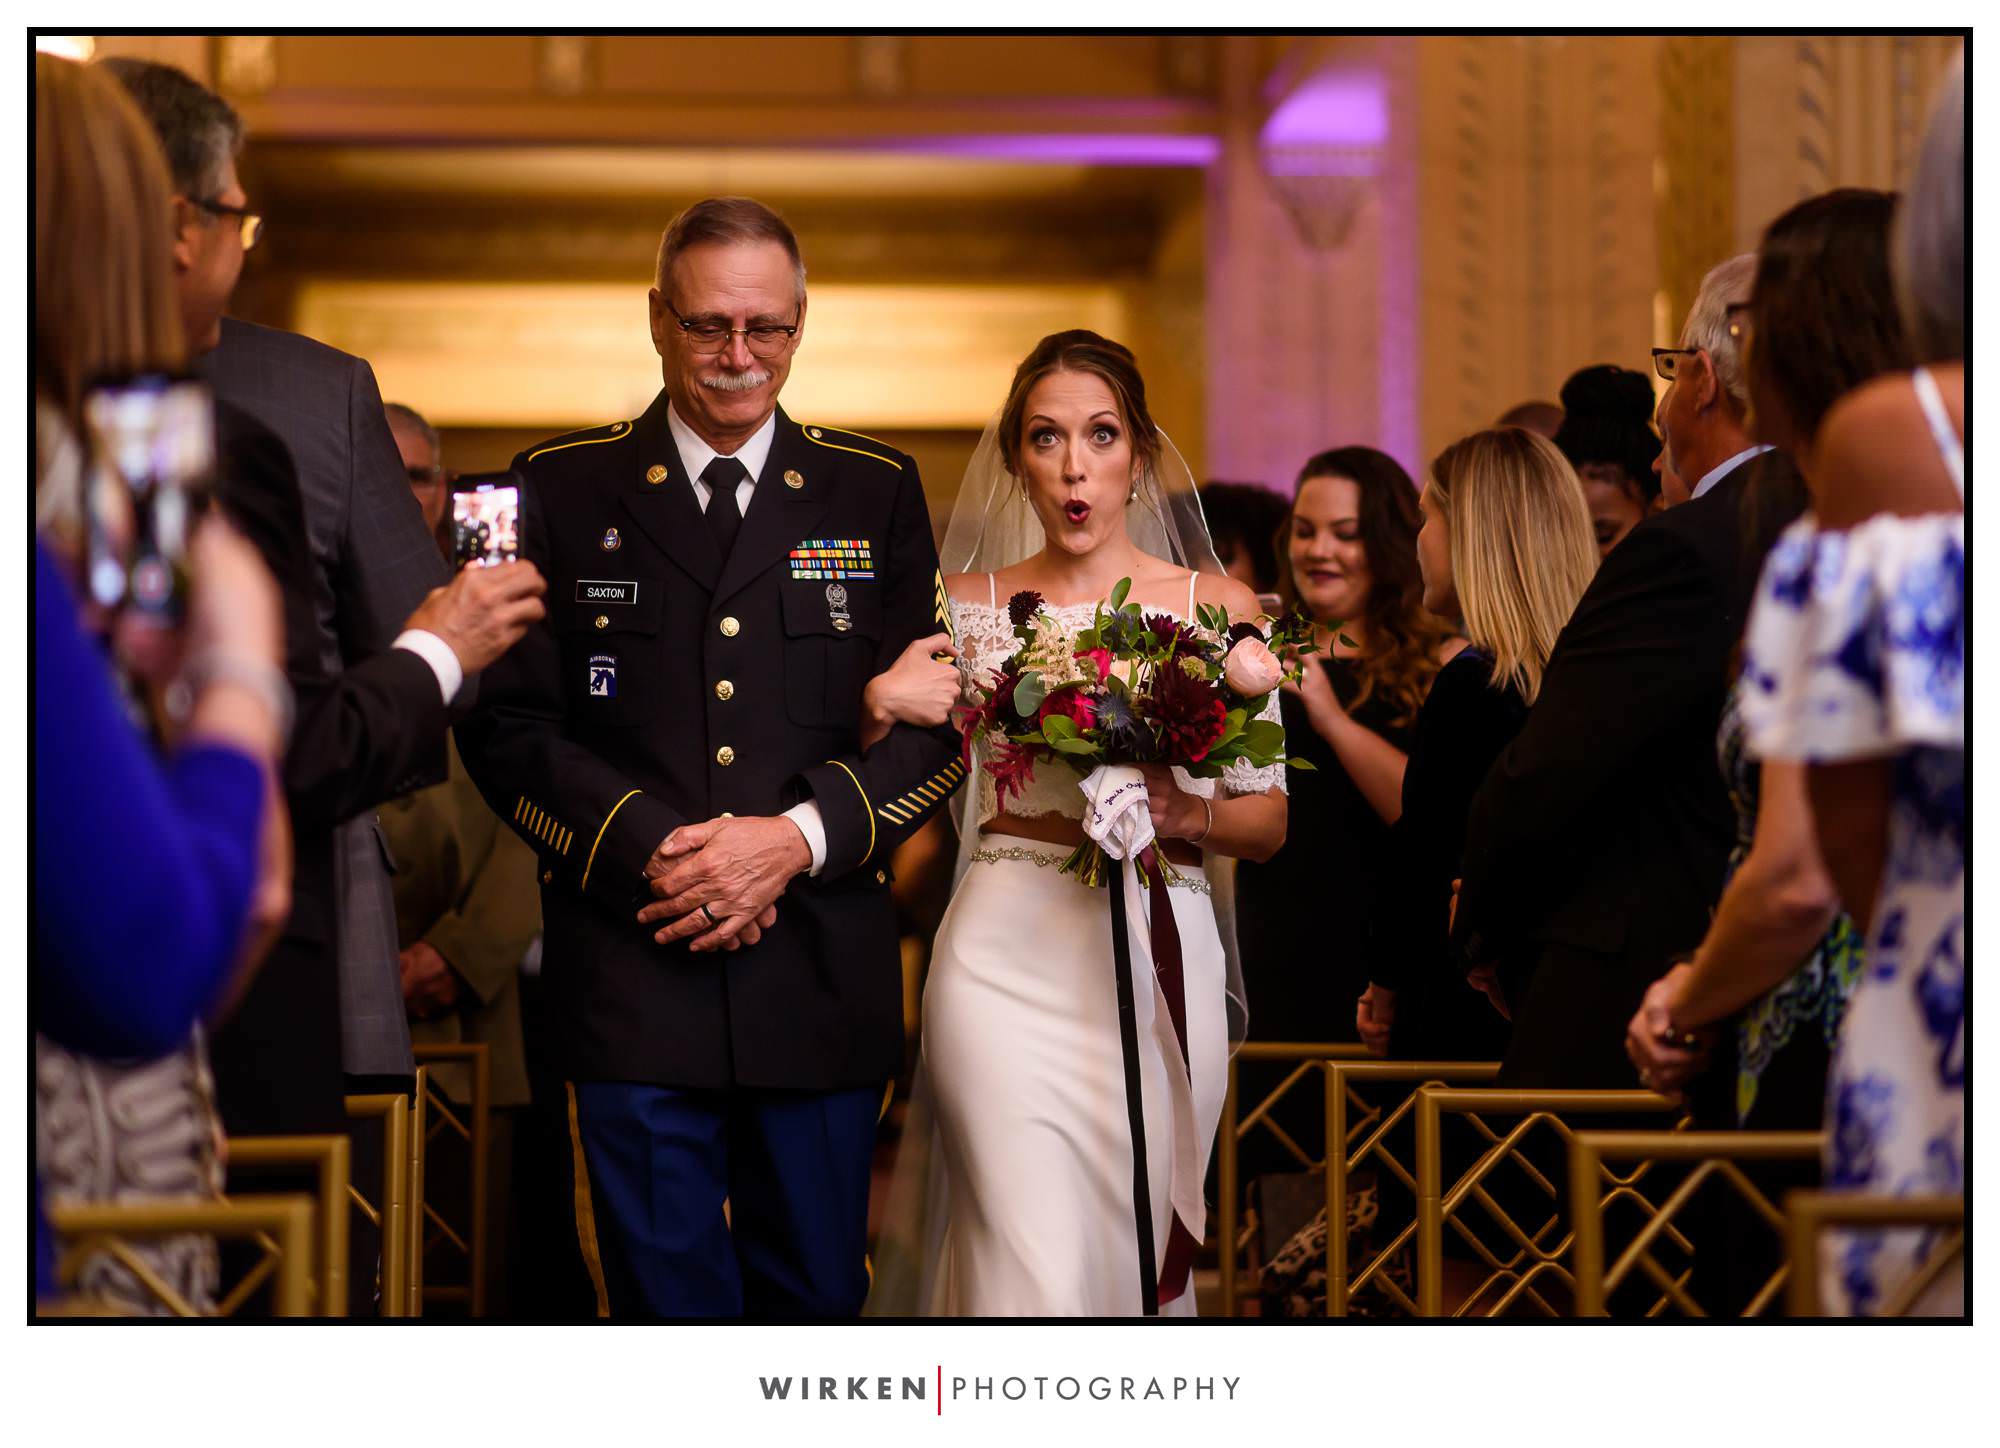 Bride and father walk down the aisle at the Grand Hall in Kansas City